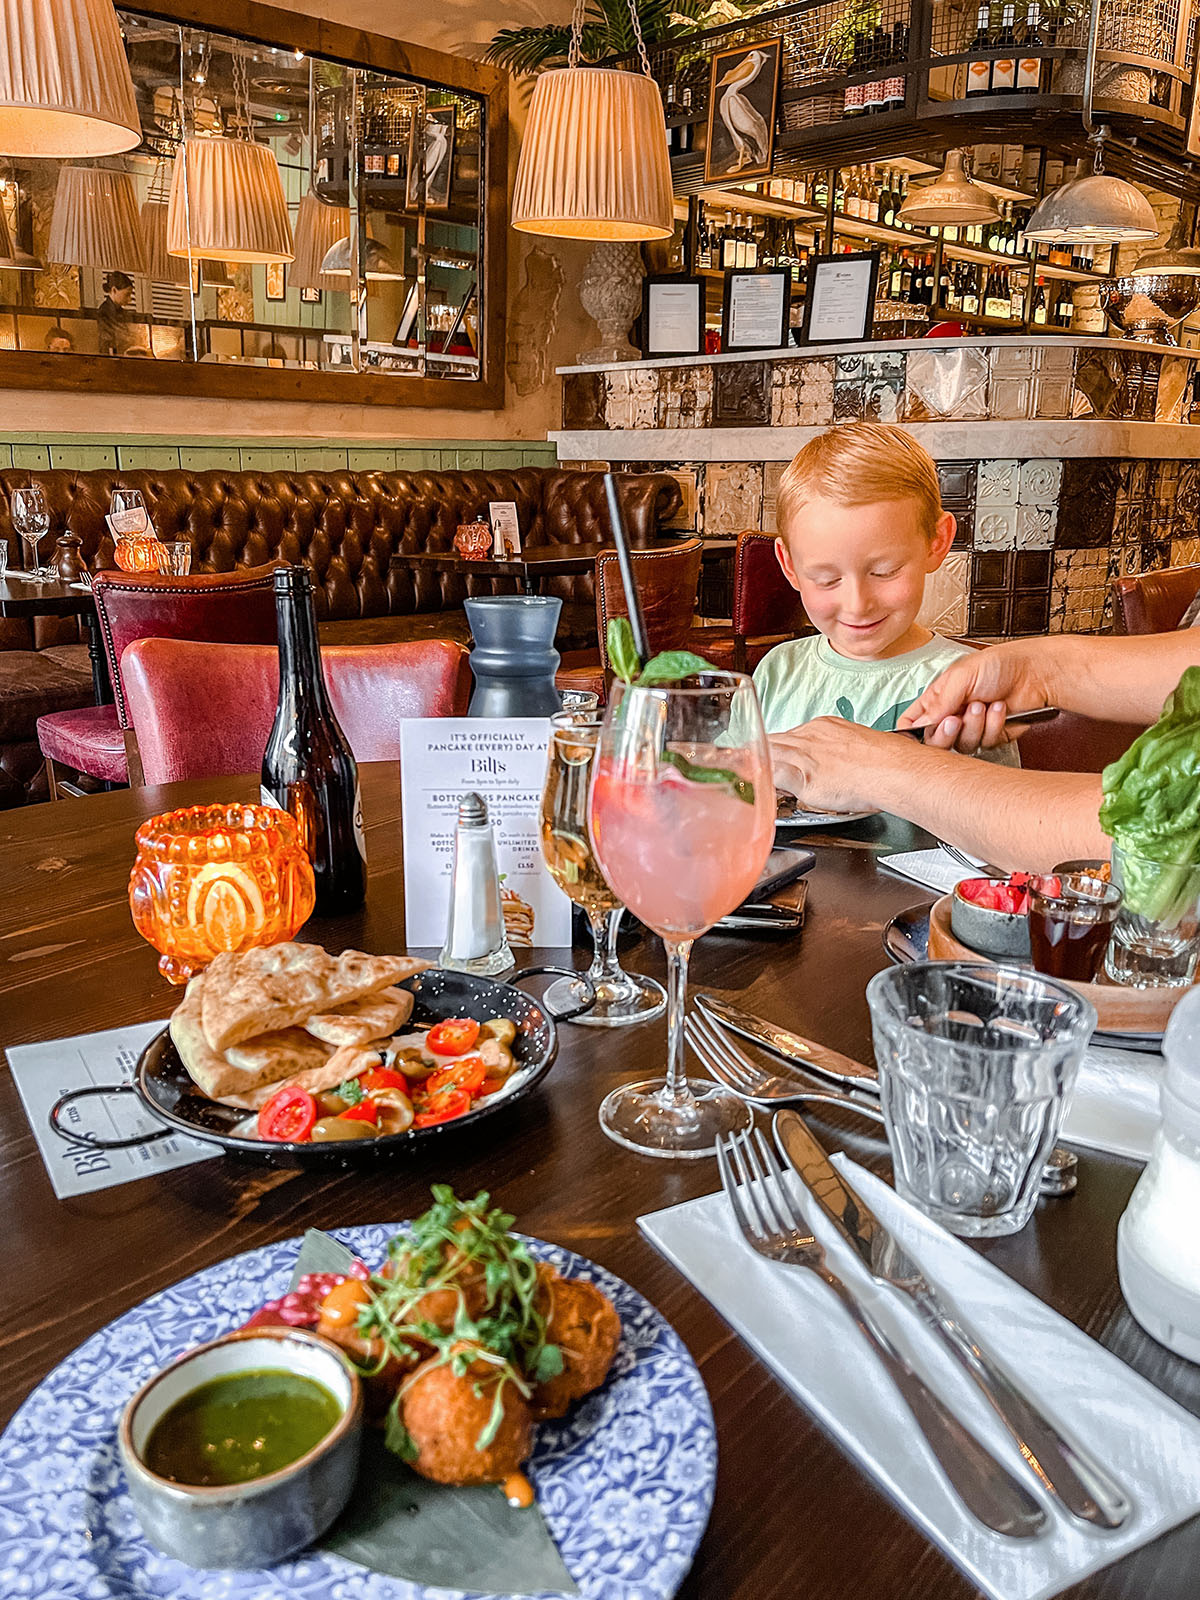 bills york restaurant review family friendly eating out